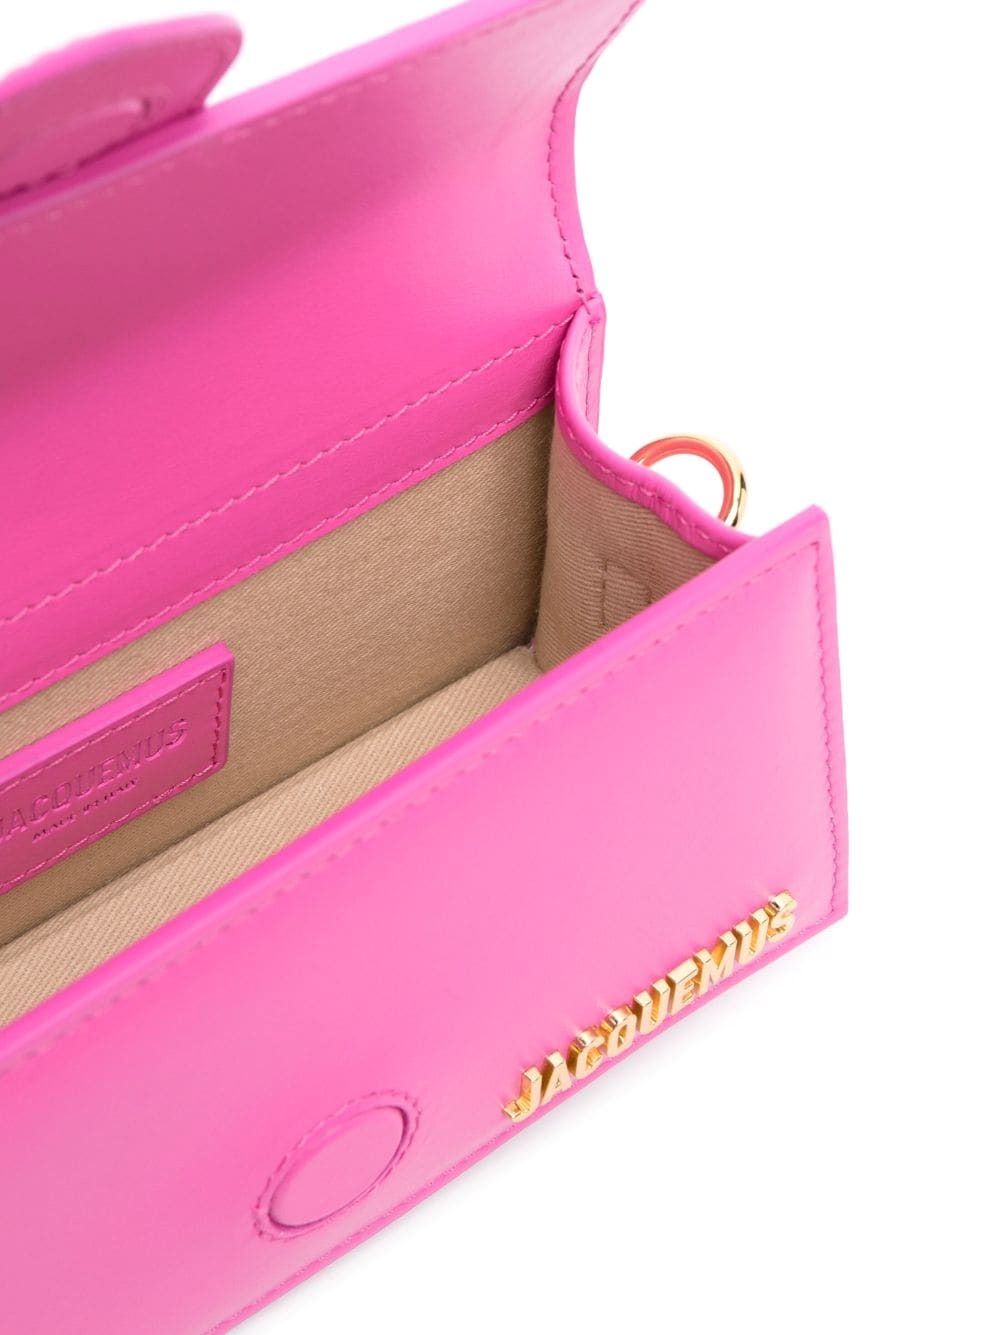 Jacquemus Le Bambino Leather Top Handle Shoulder Bag in Neon Pink